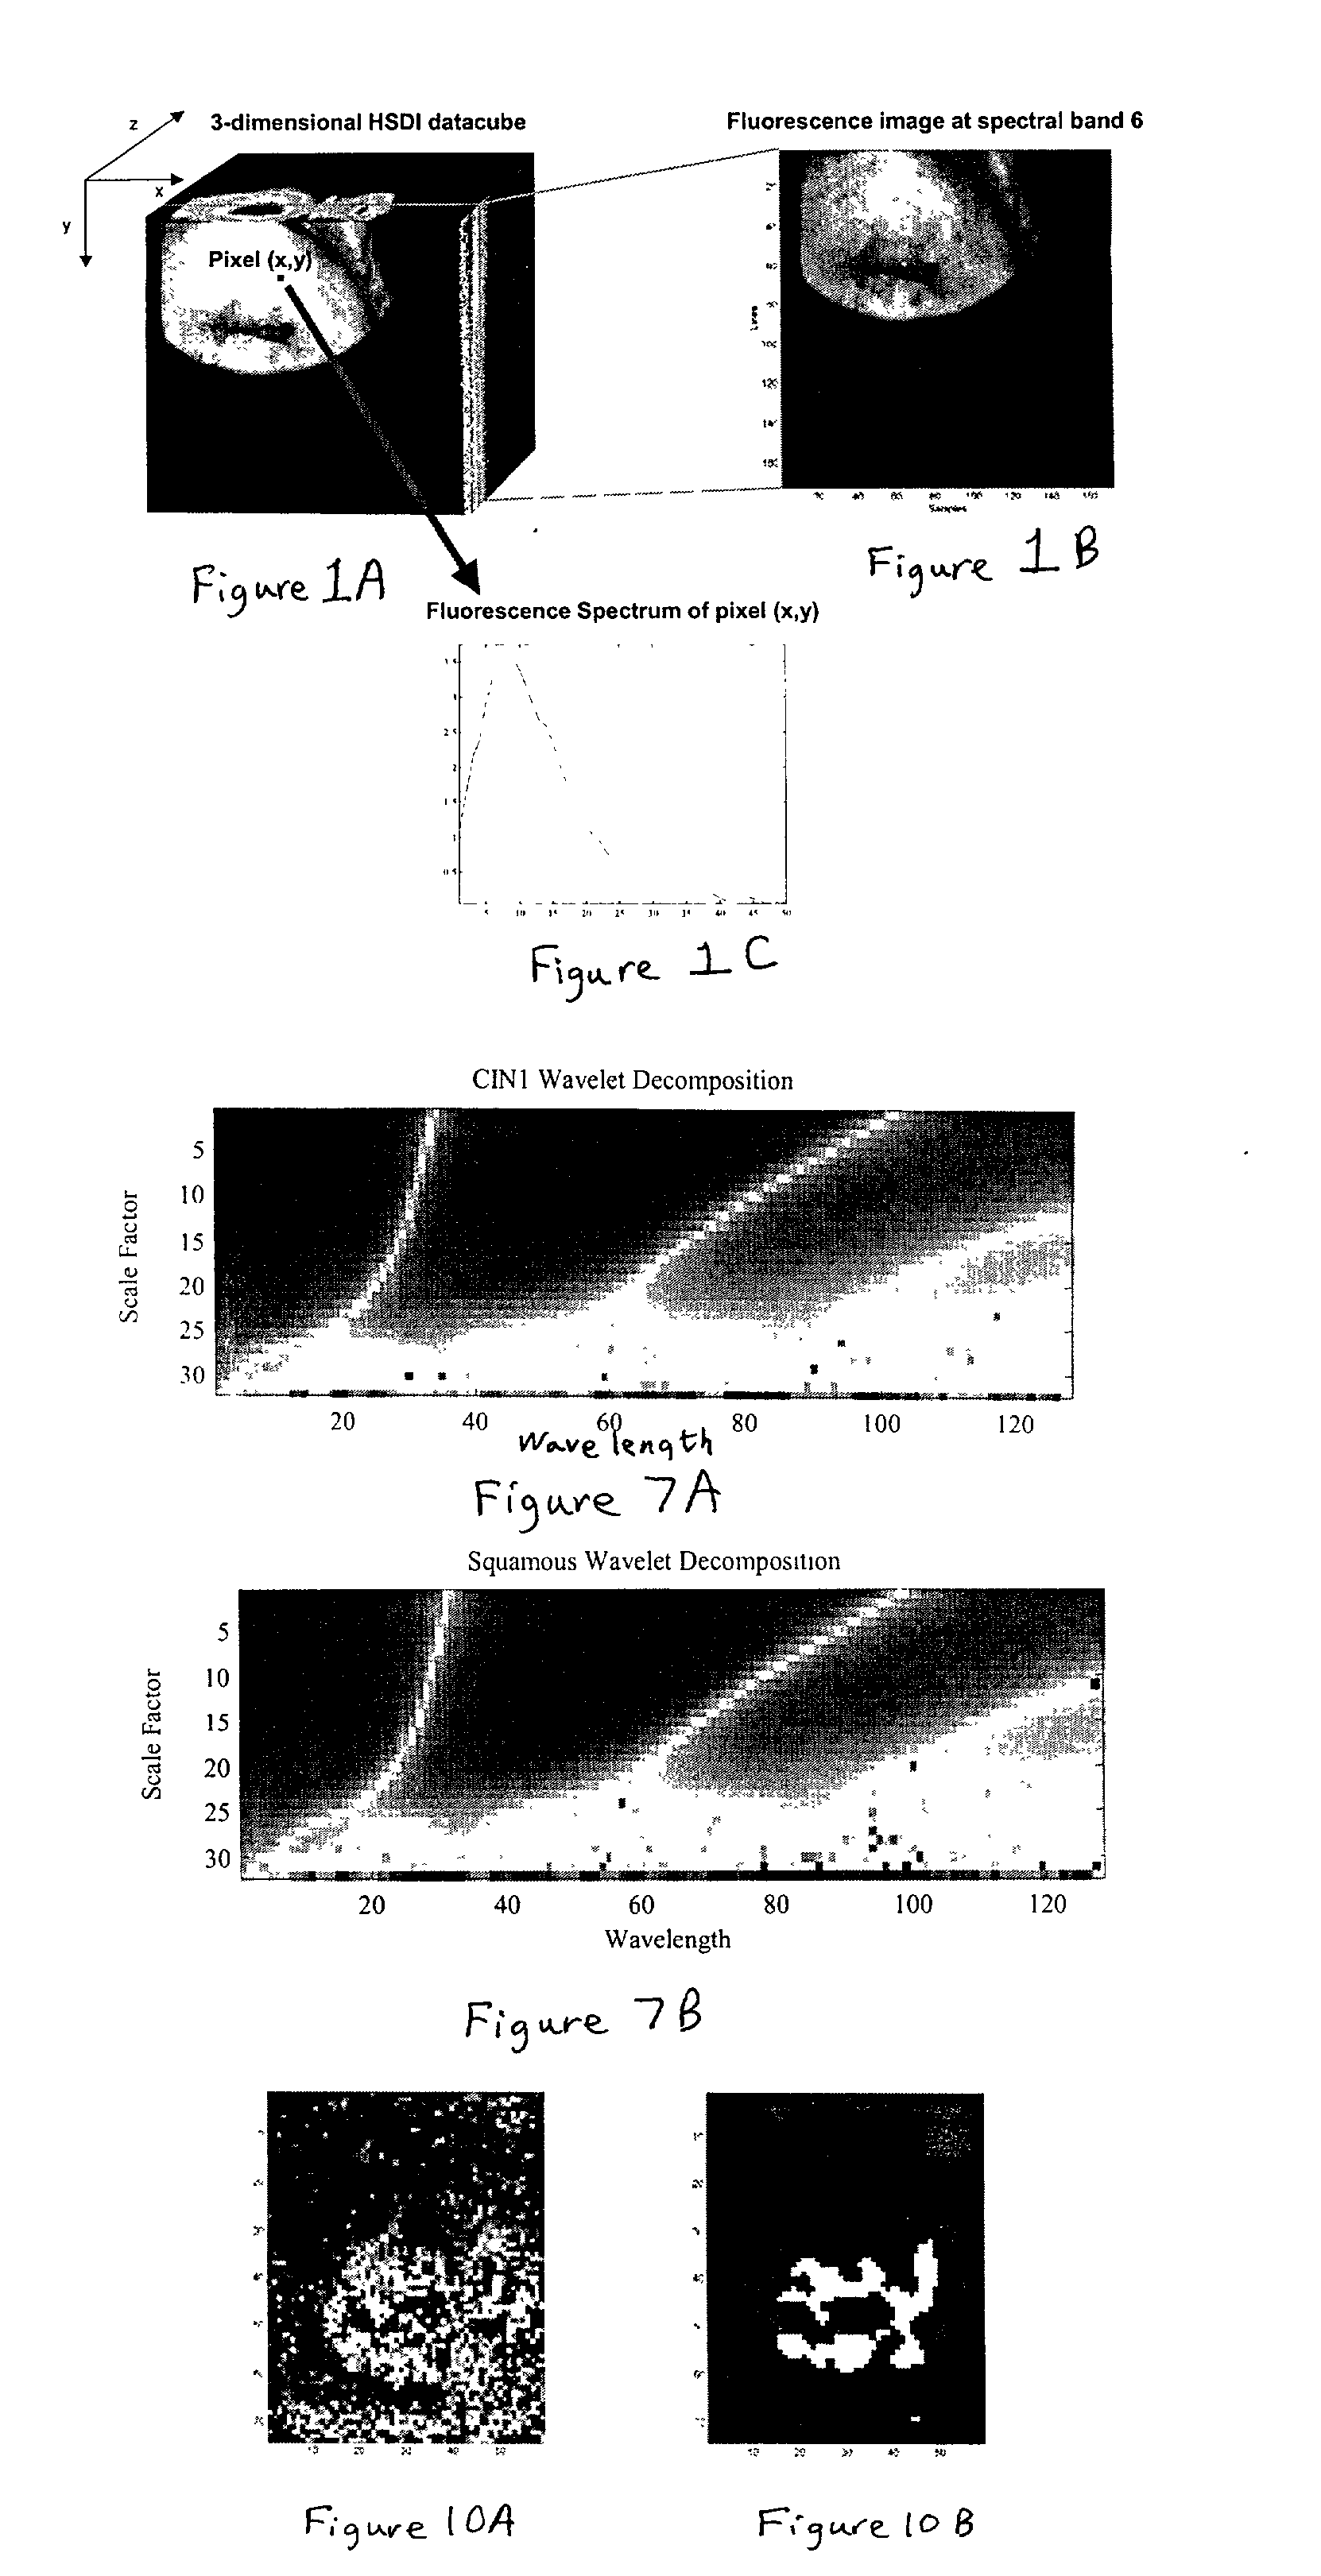 Method and apparatus for generating two-dimensional images of cervical tissue from three-dimensional hyperspectral cubes